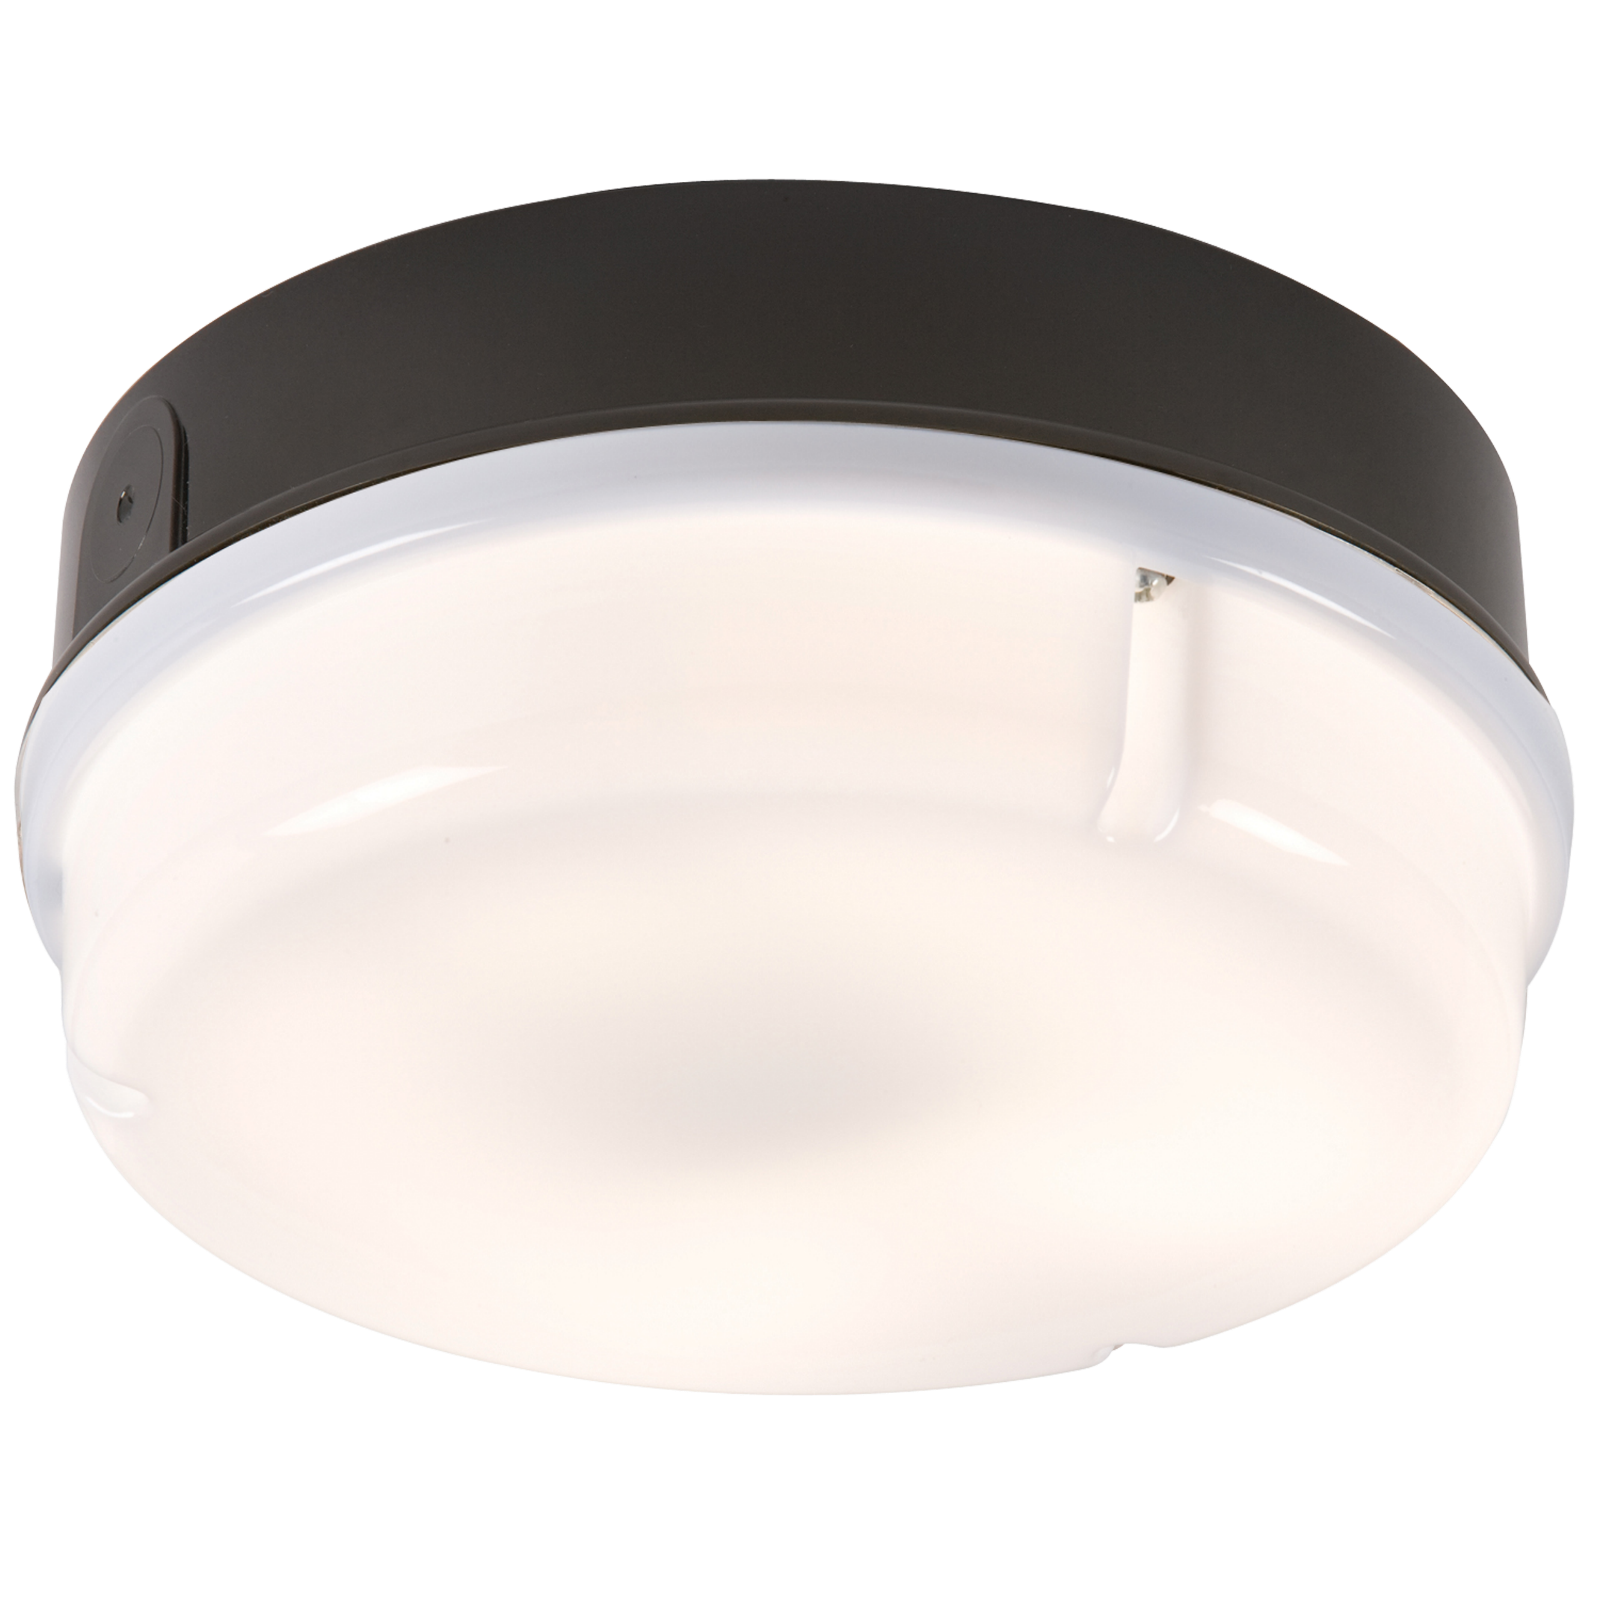 IP65 16W Round Bulkhead With Opal Diffuser And Black Base - TPR16BOHF 